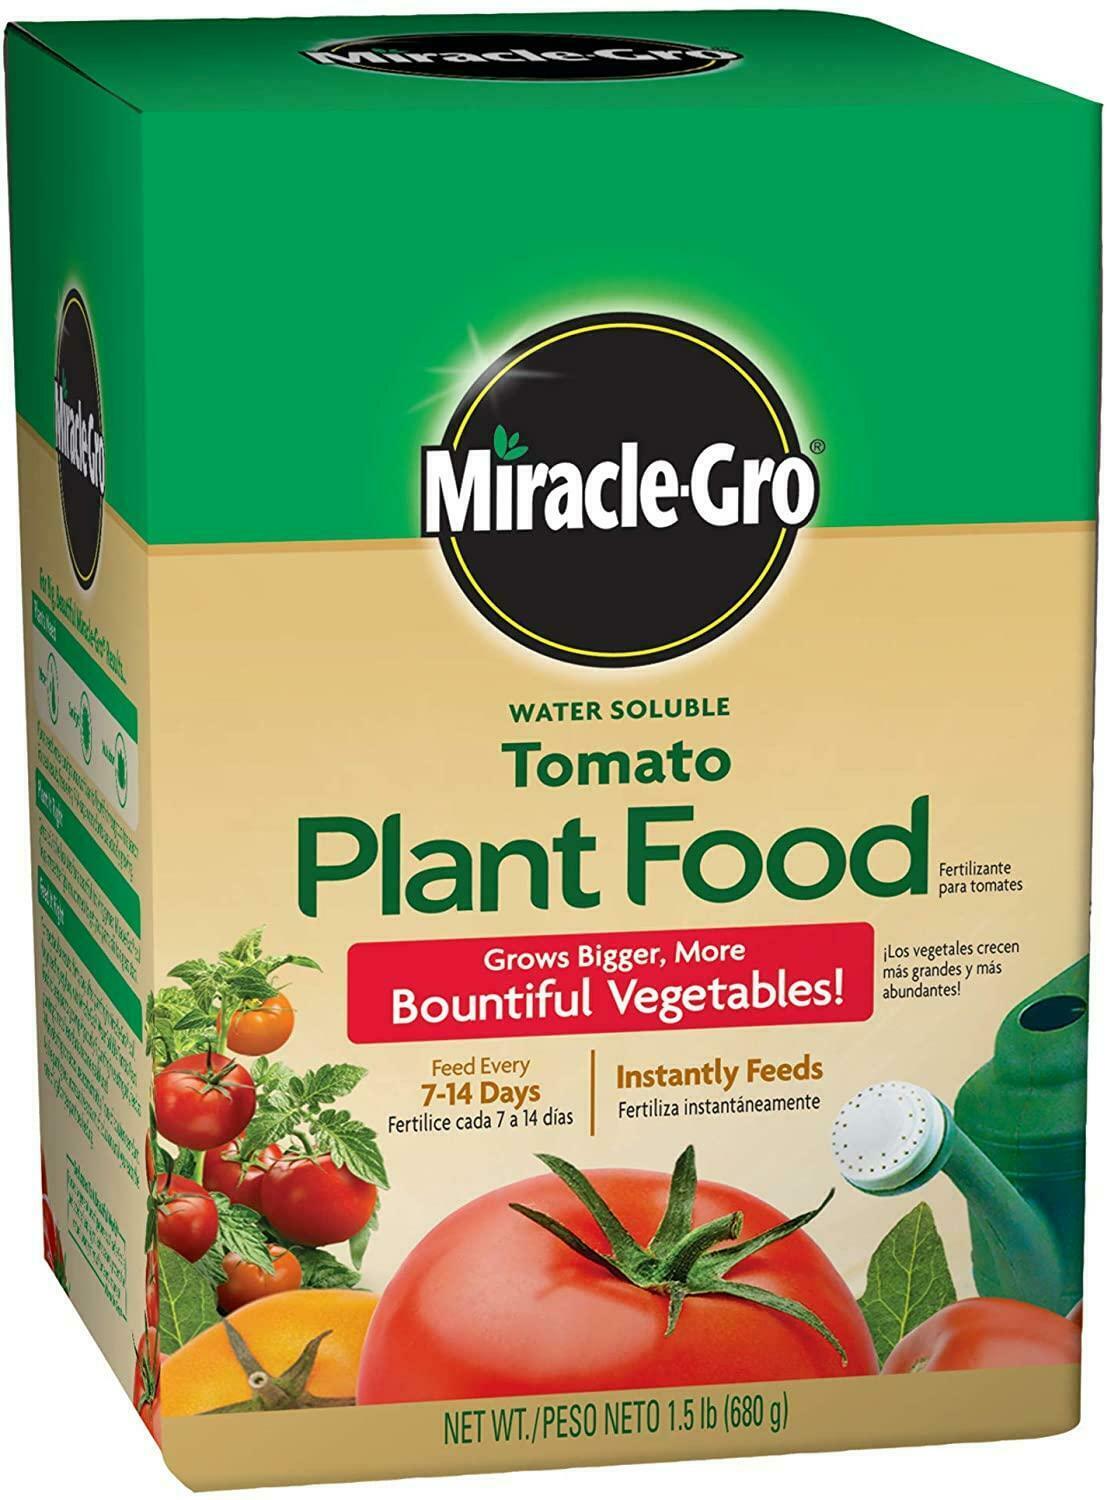 Miracle-Gro Tomato Food Plant Grow Bigger Water Soluble Vegetables Fertilizer